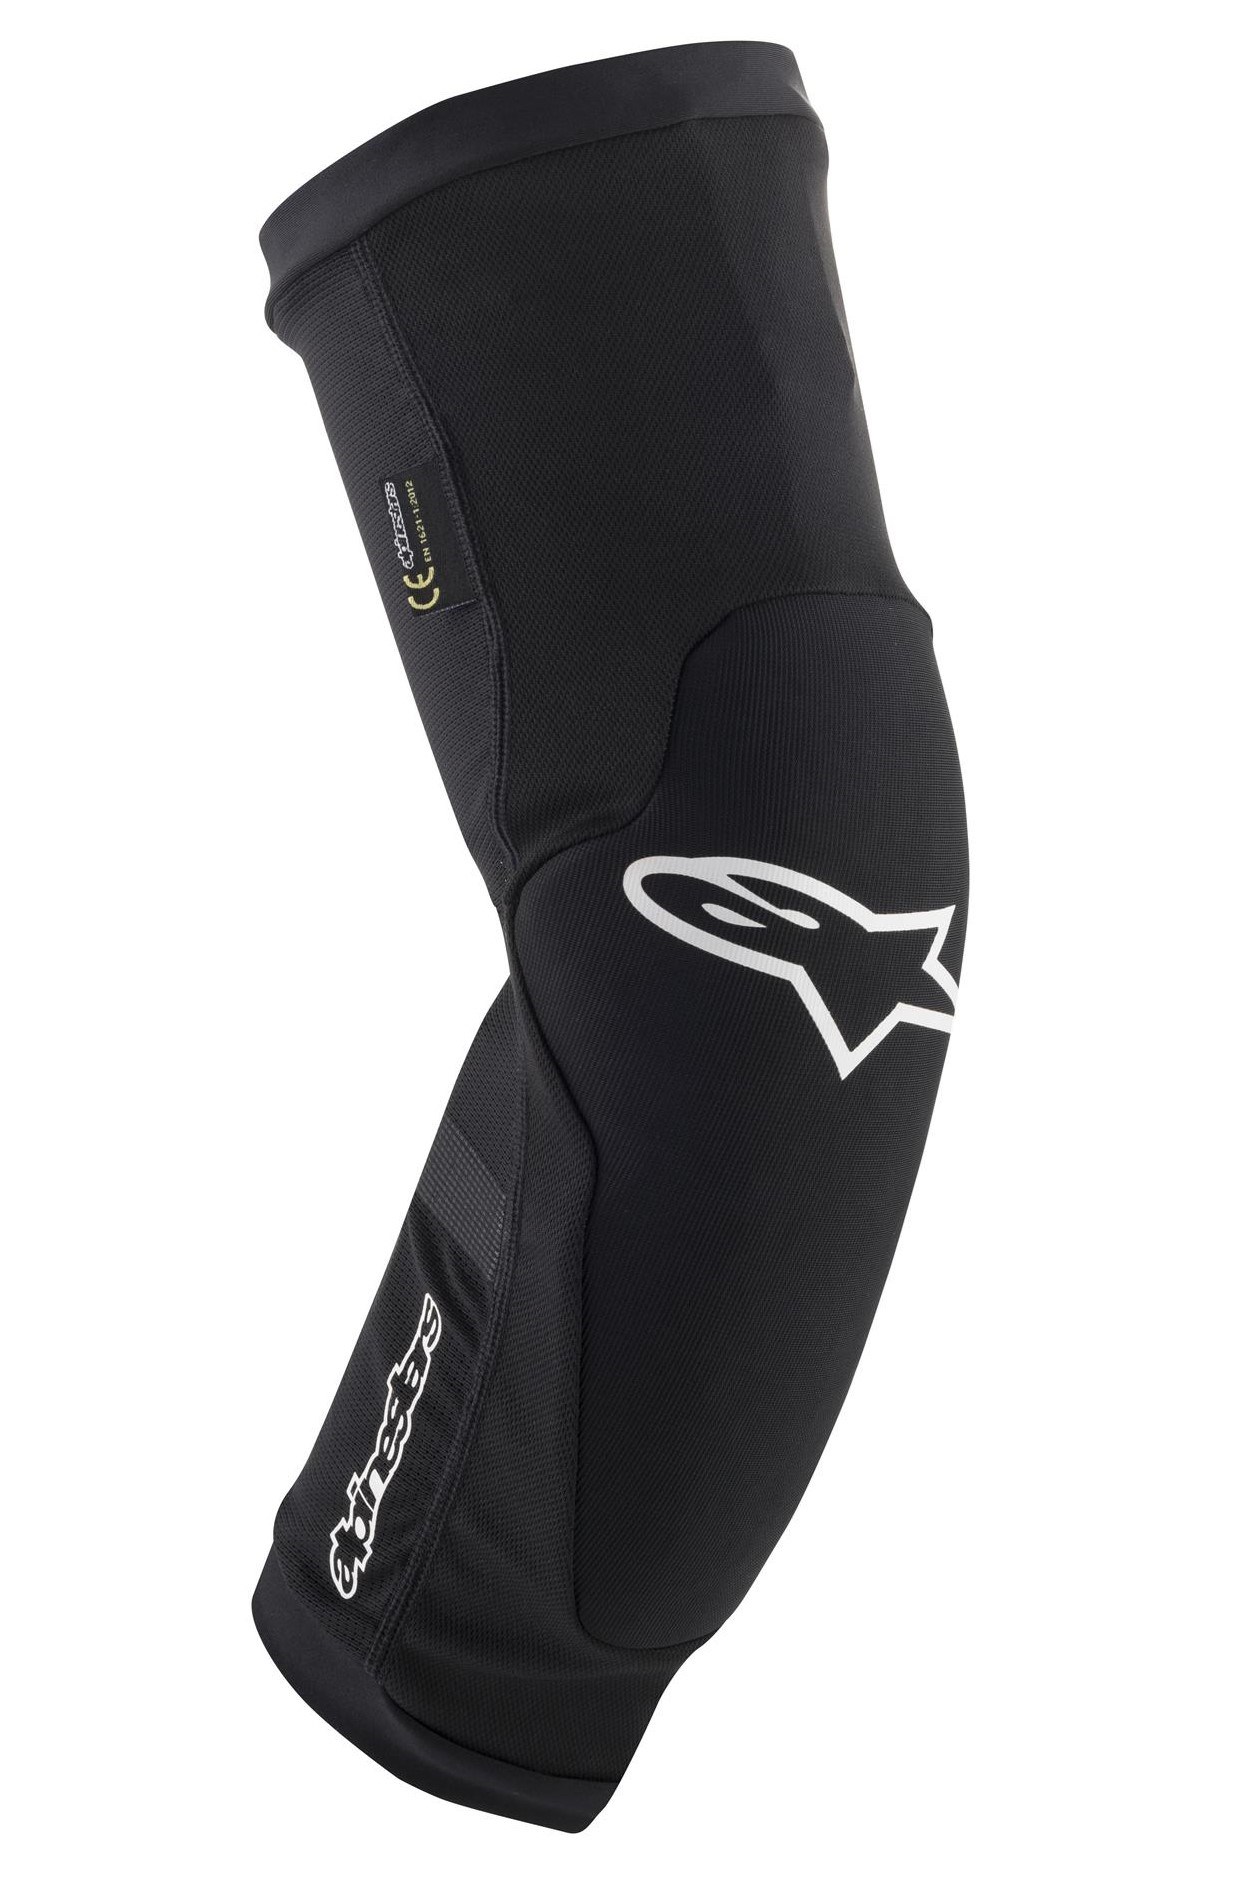 Paragon Plus Youth Knee Protector -